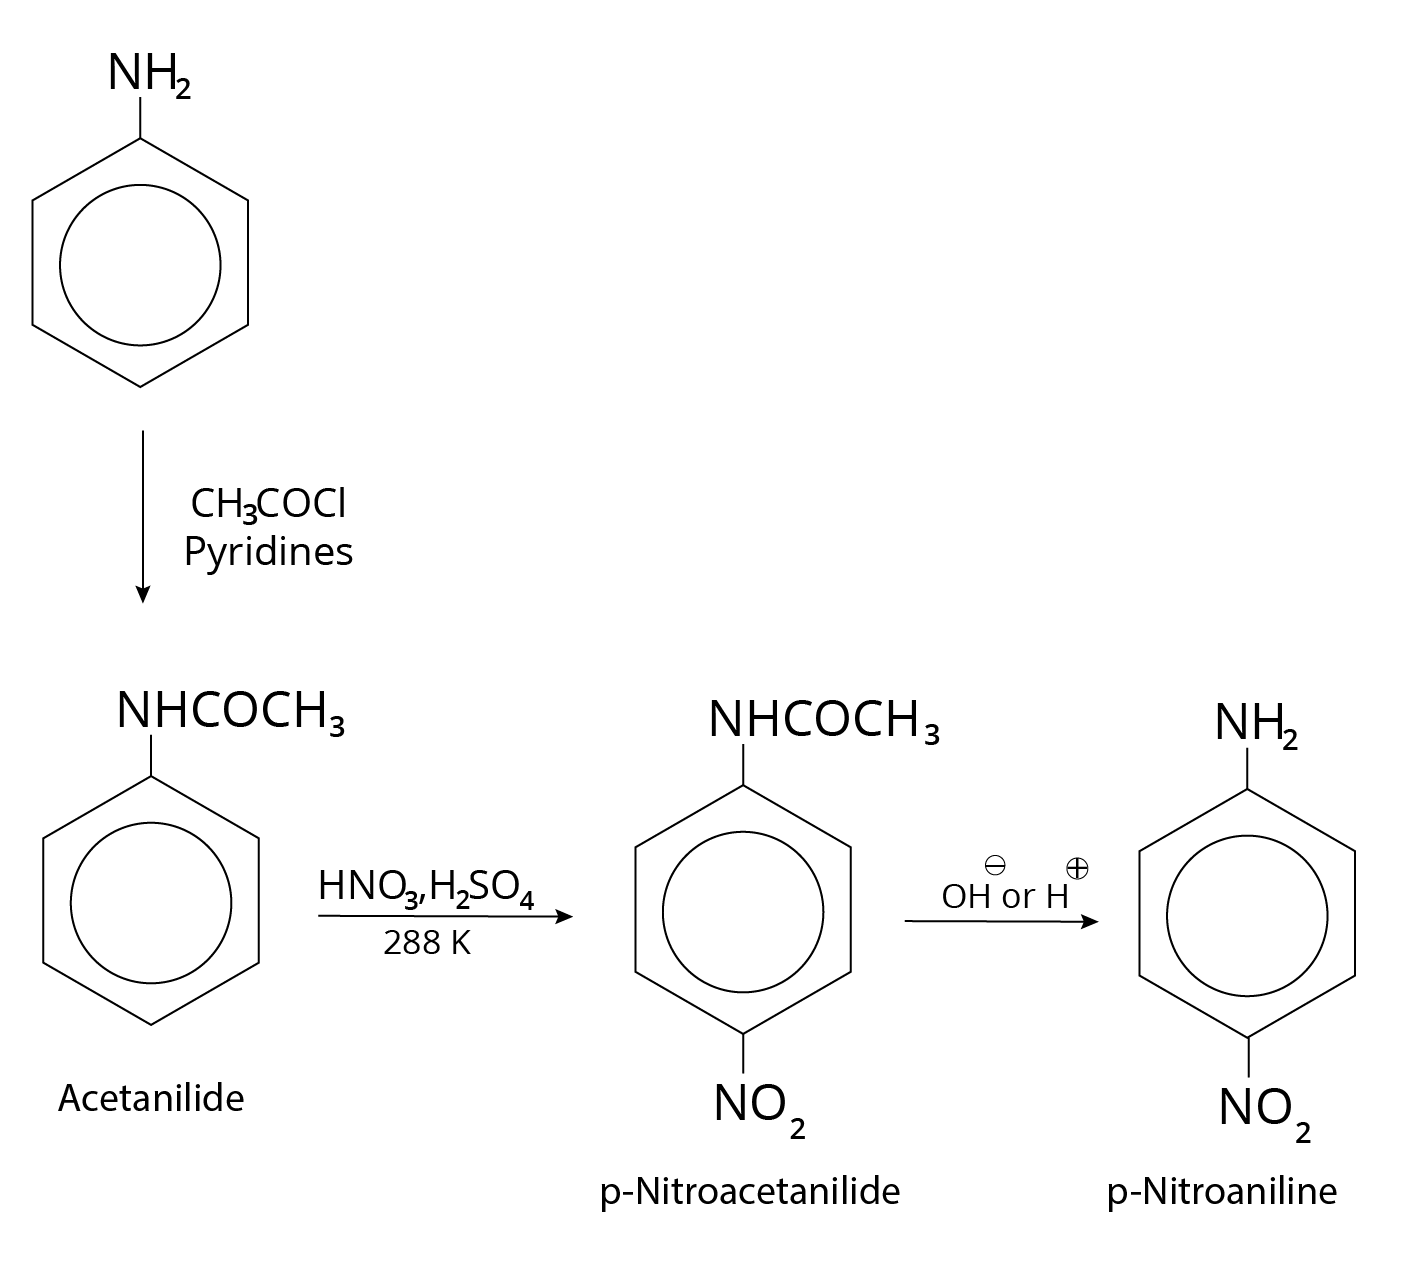 Reaction of Aniline with Pyridine